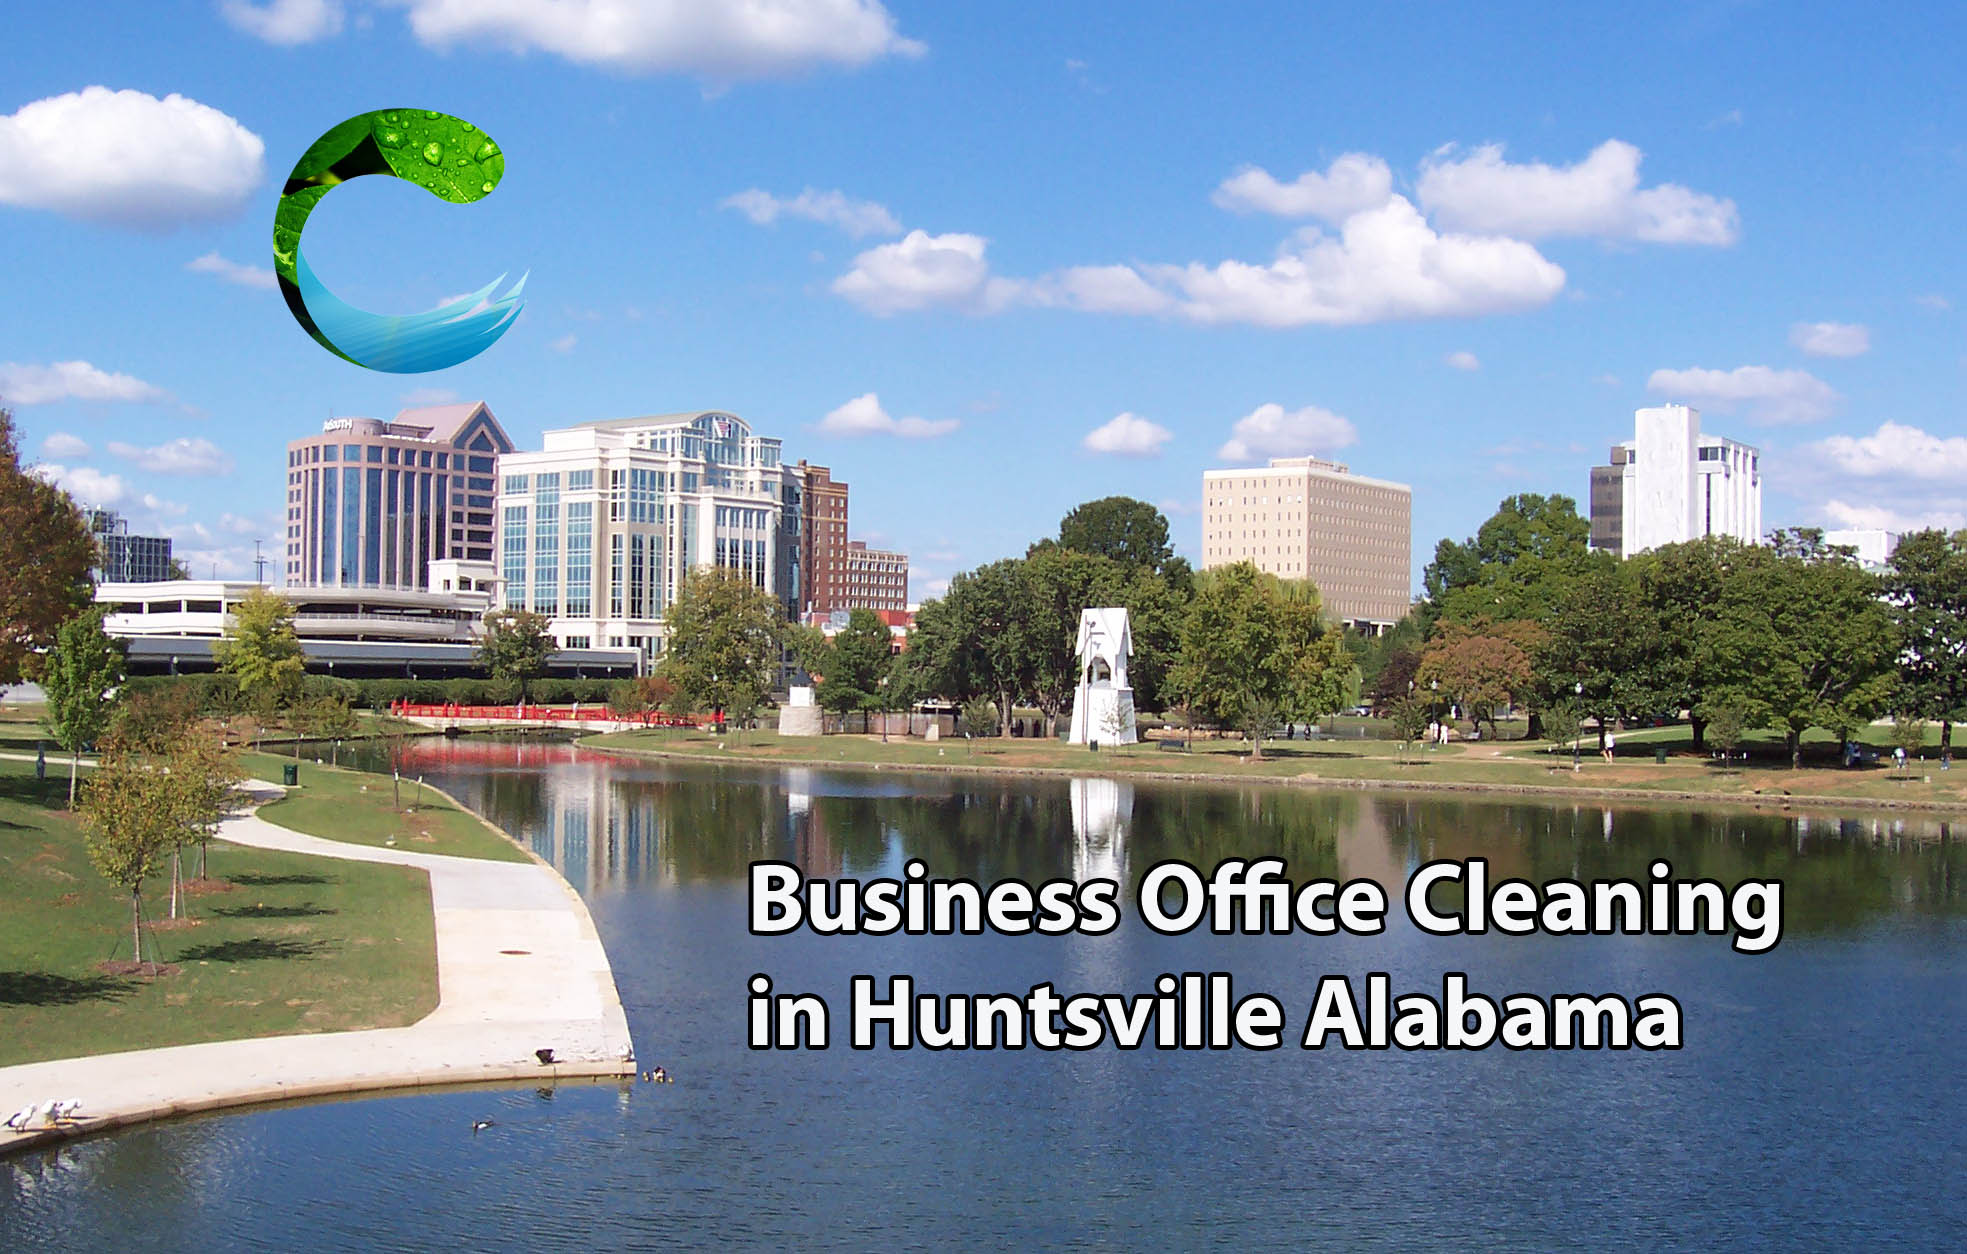 Business Office Cleaning in Huntsville Alabama